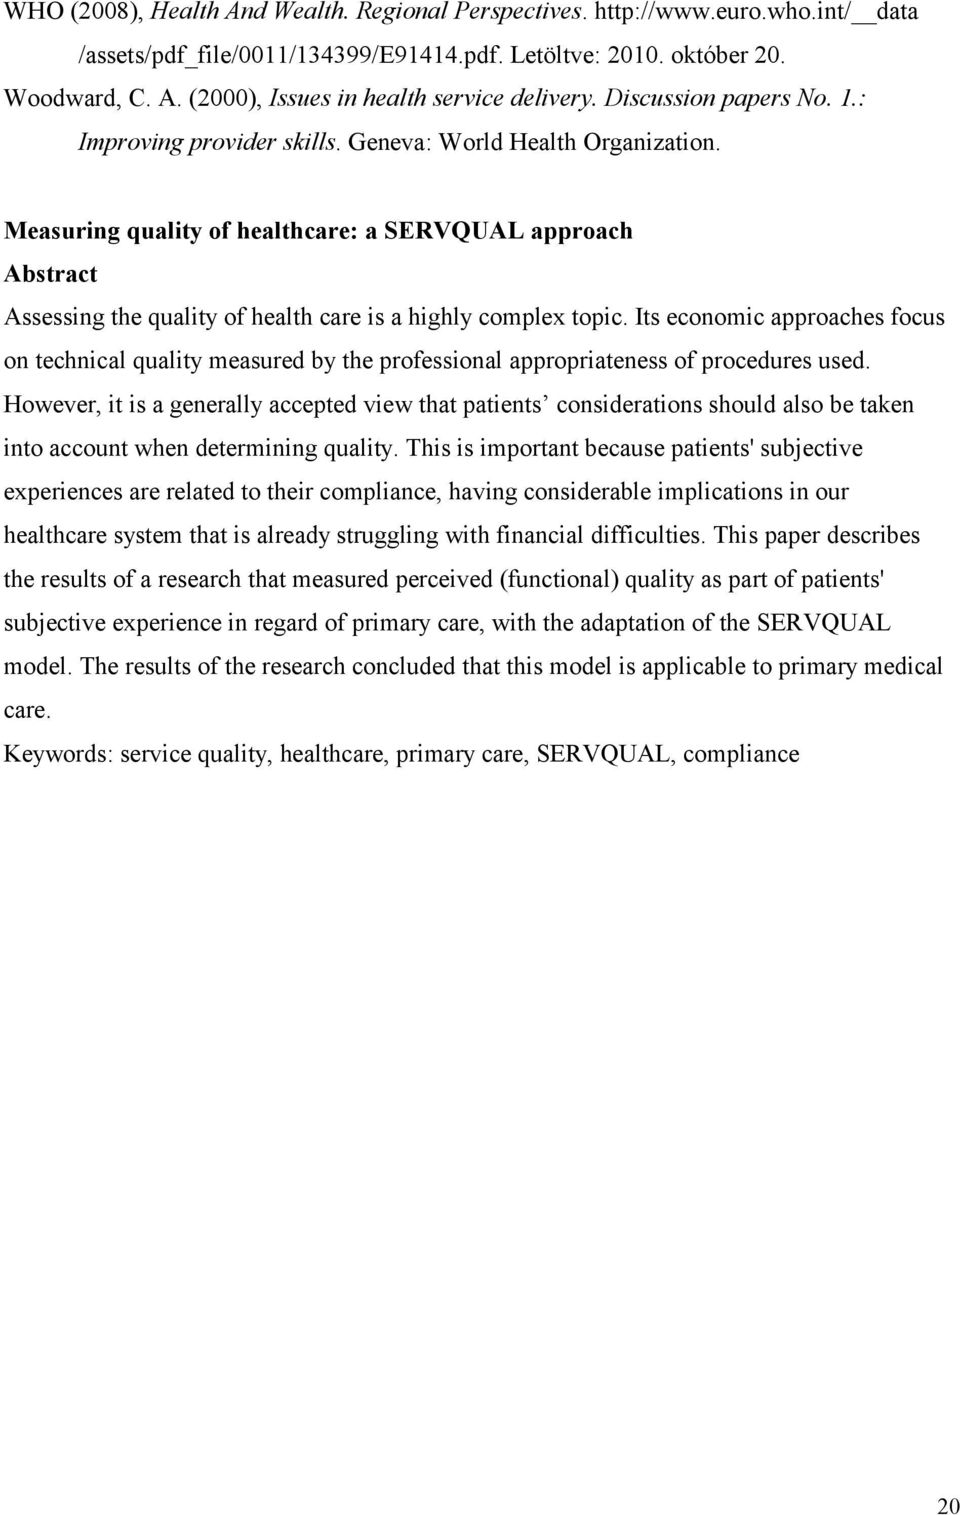 Measuring quality of healthcare: a SERVQUAL approach Abstract Assessing the quality of health care is a highly complex topic.